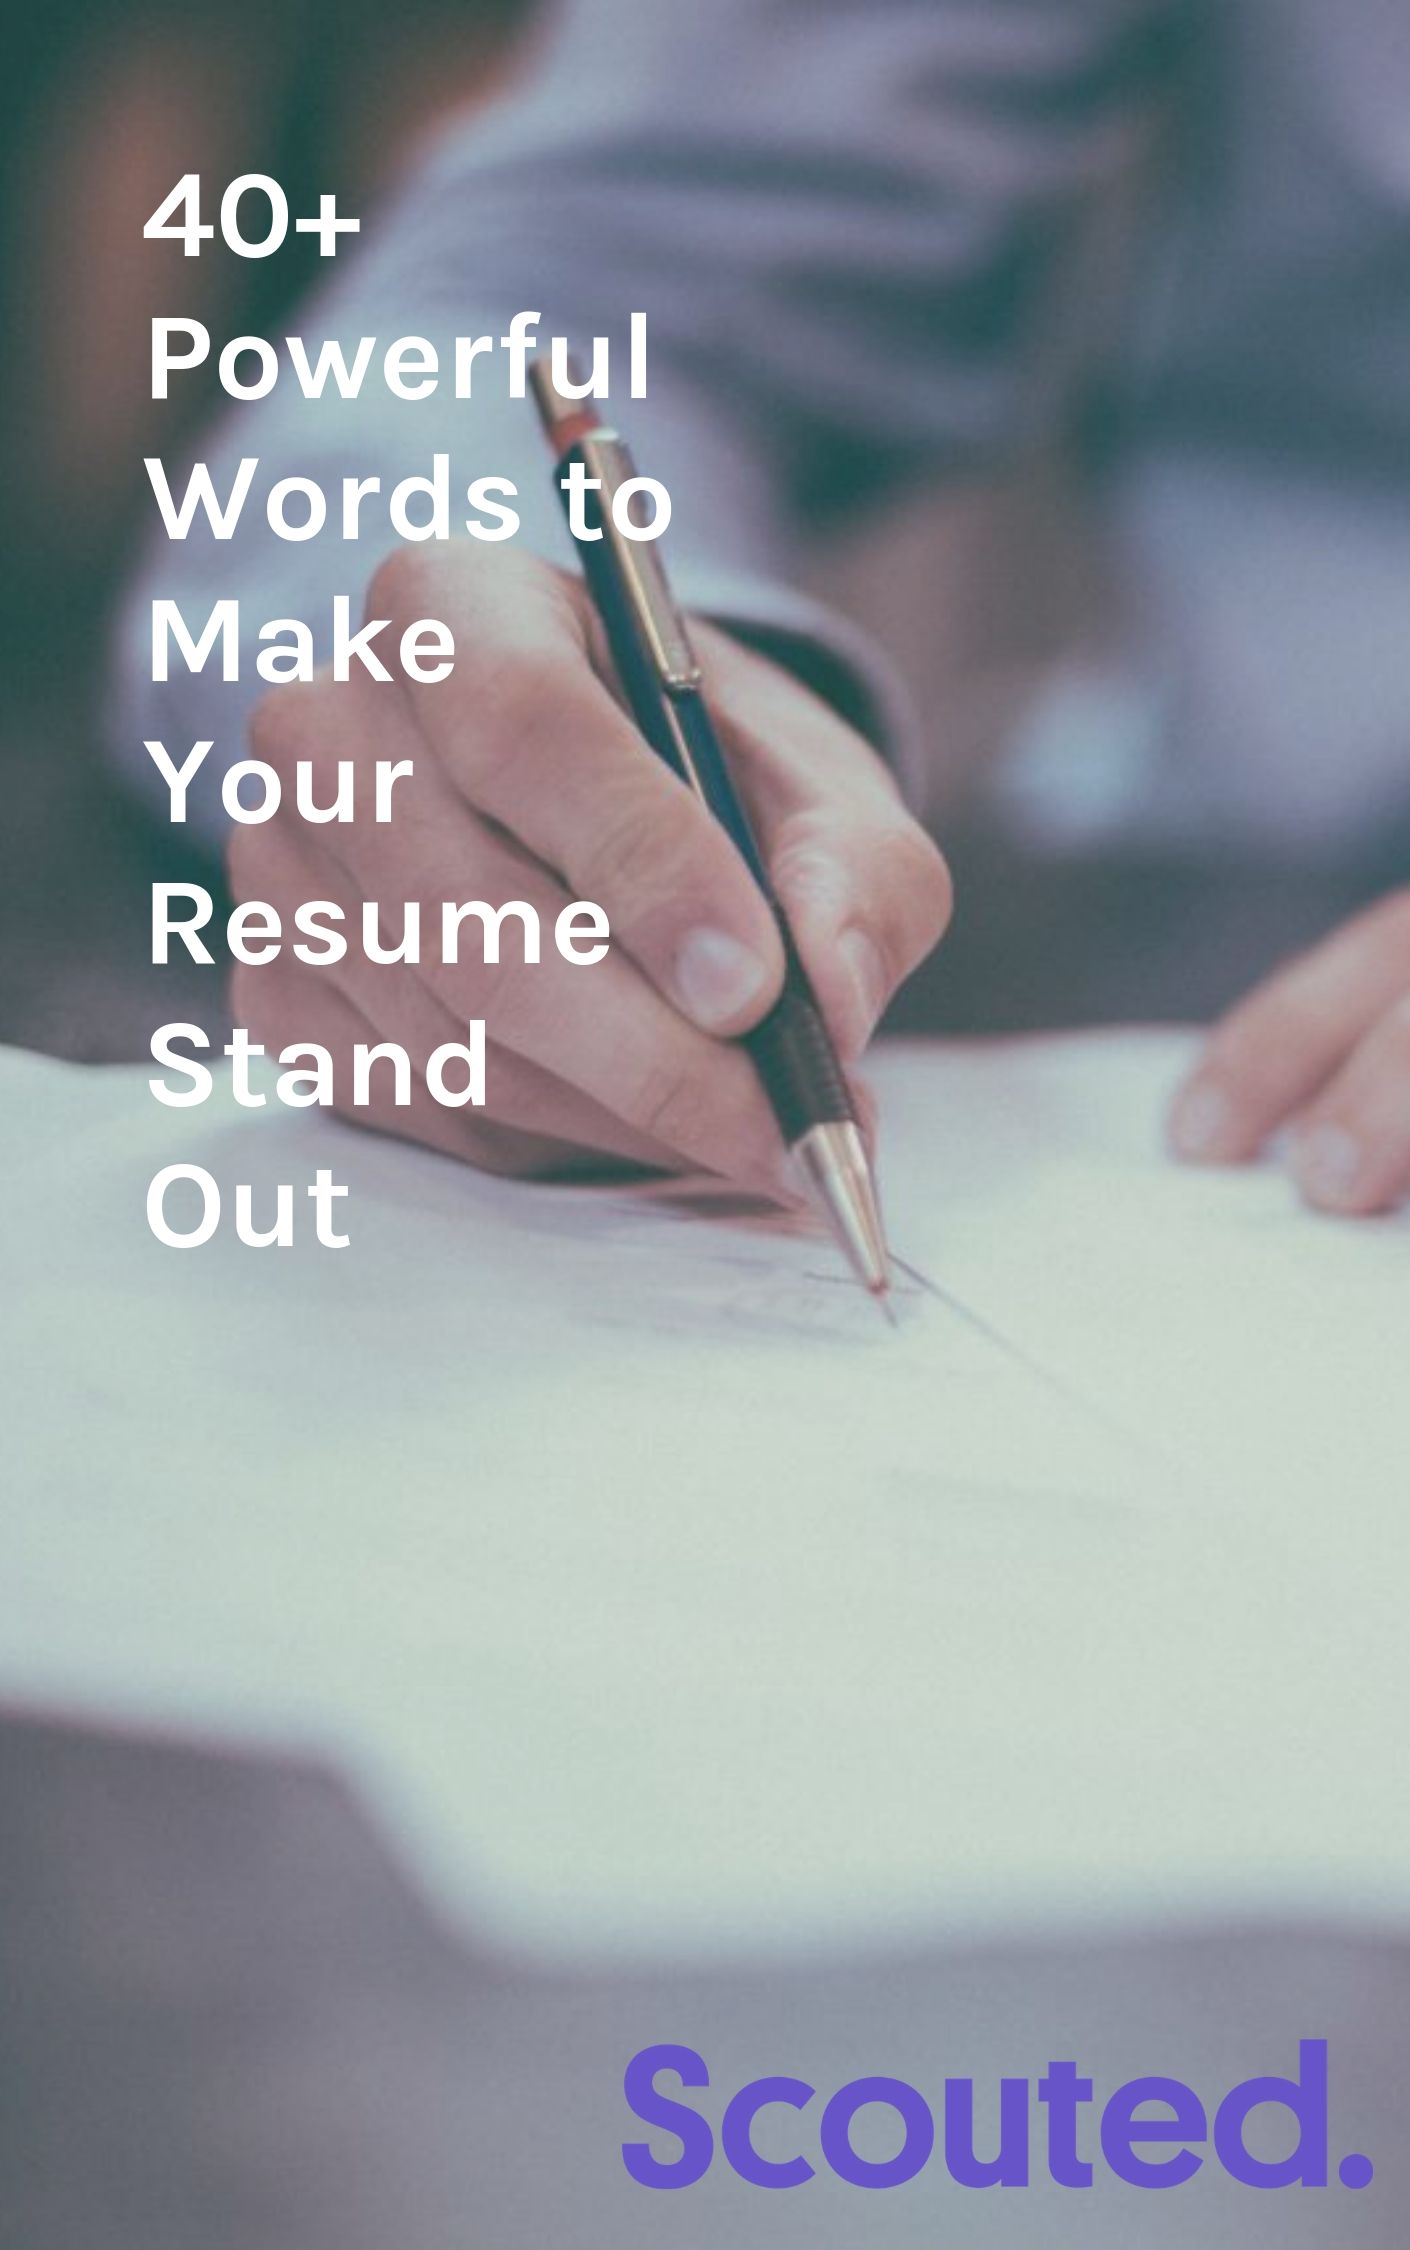 While you don't have to copy and paste these words and force them into your resume, take a hard look at your resume and ask yourself if it really tells a hiring manager what you can do for them. And if you feel inclined to some word inspiration to help spruce up your resume, take a look at the list we curated below and feel free to glitter your resume with words that will show a hiring manager that you're a game changer. You don't just show up and do a job, you show up and make a difference.